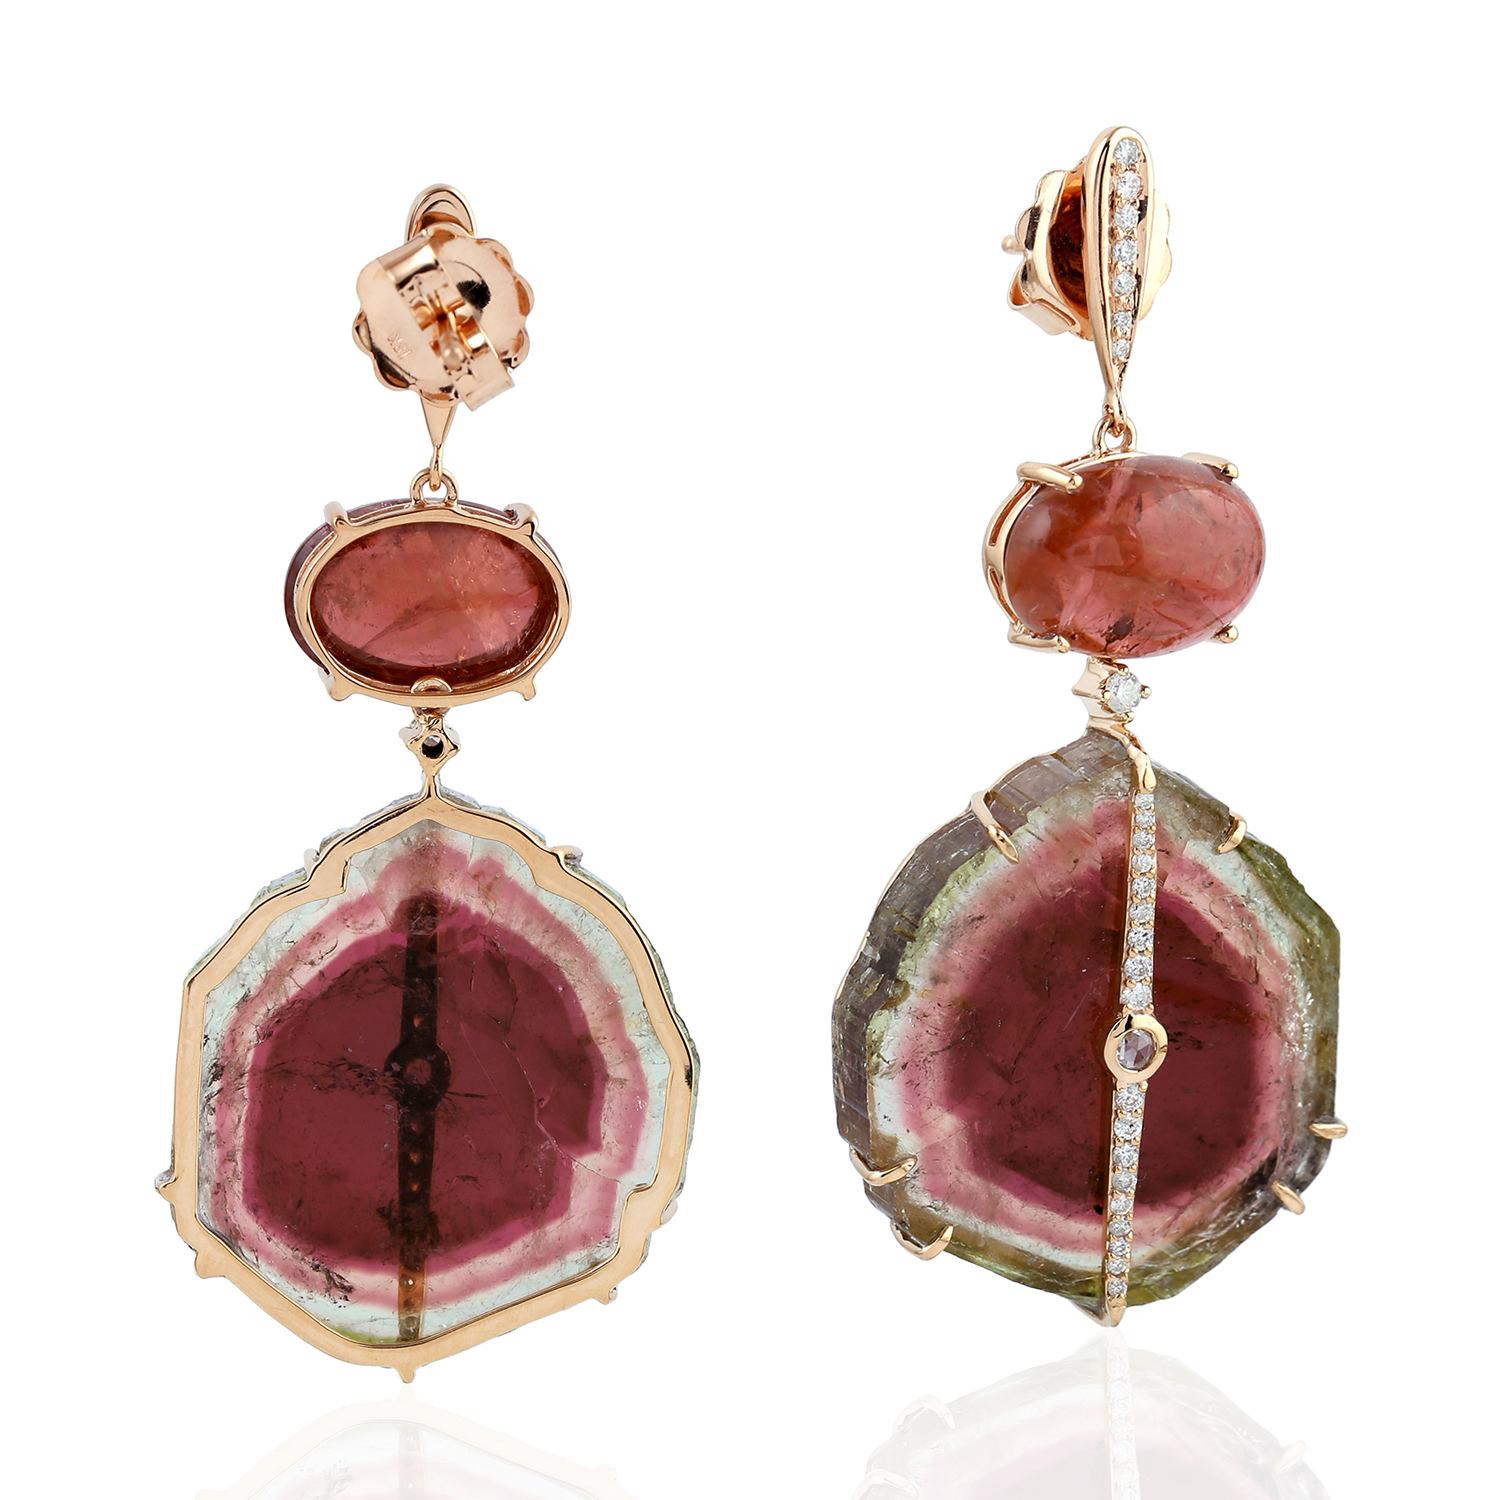 Art Deco Watermelon Sliced Tourmaline with Rosecut Tourmaline Earrings in 18k Rose Gold For Sale